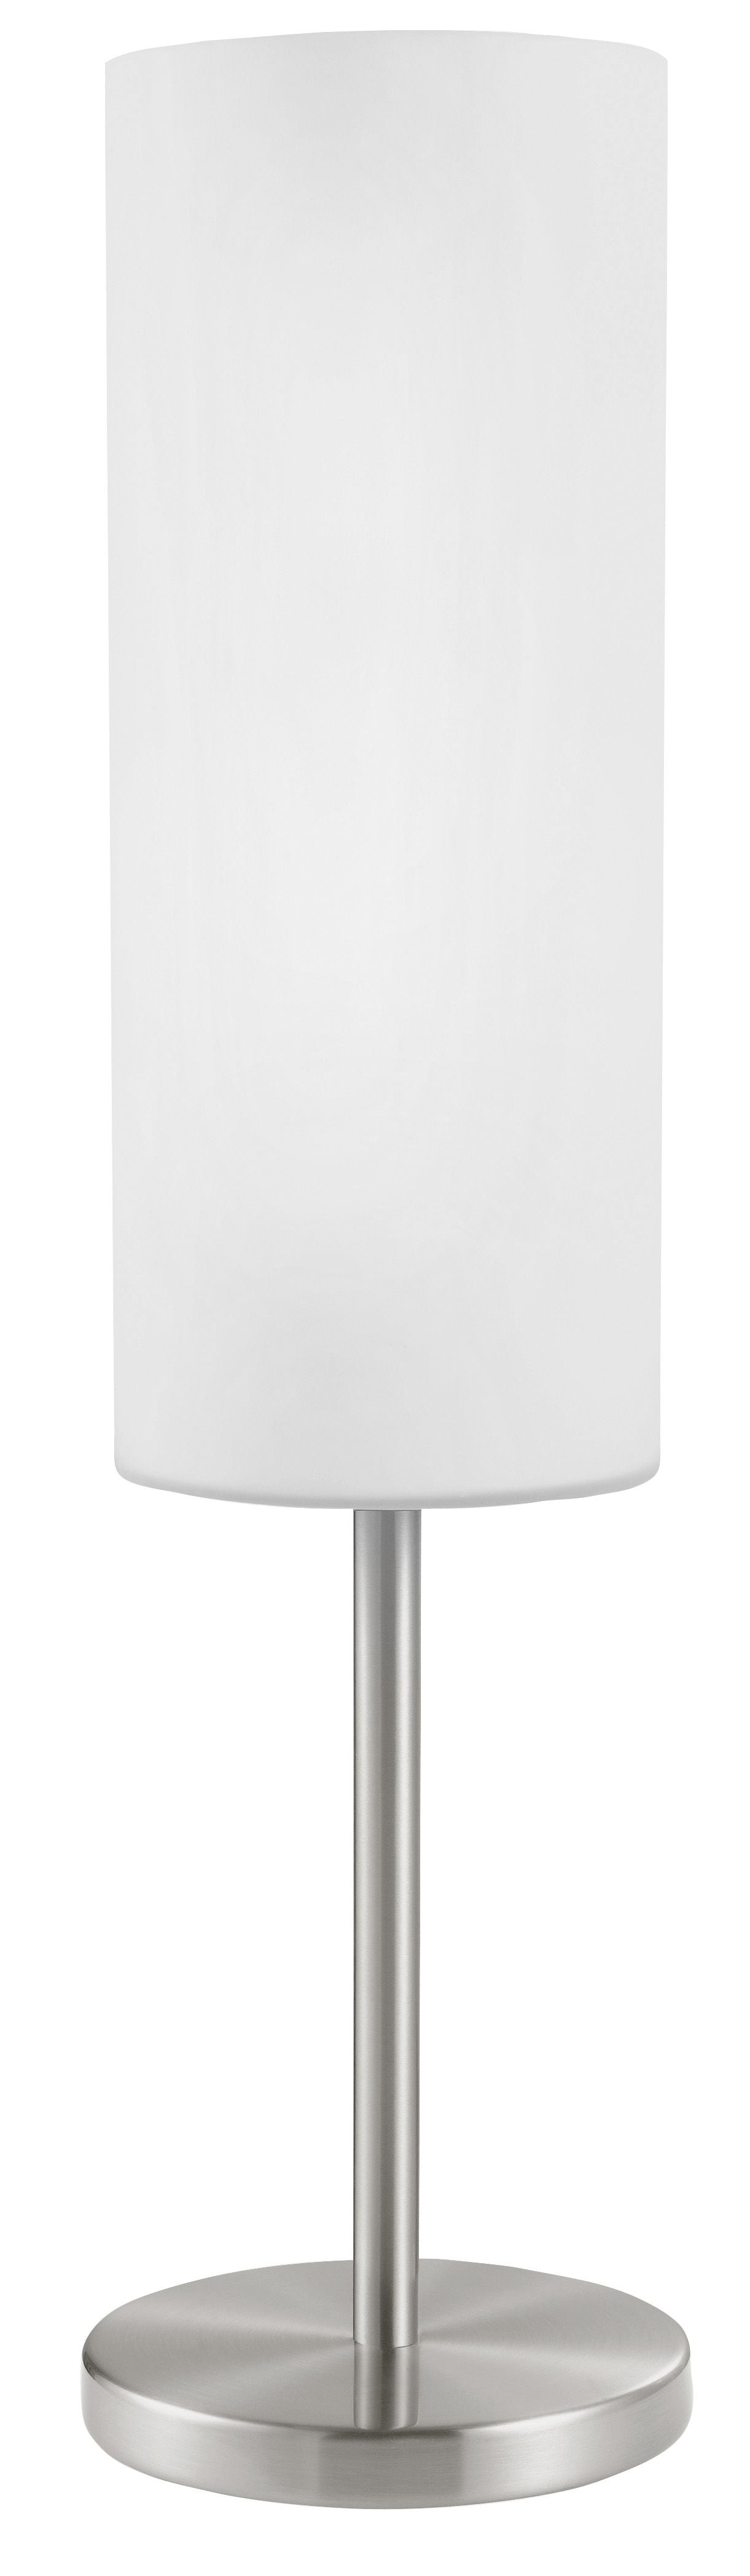 Troy 3 Table lamp Stainless steel - 85981A | EGLO